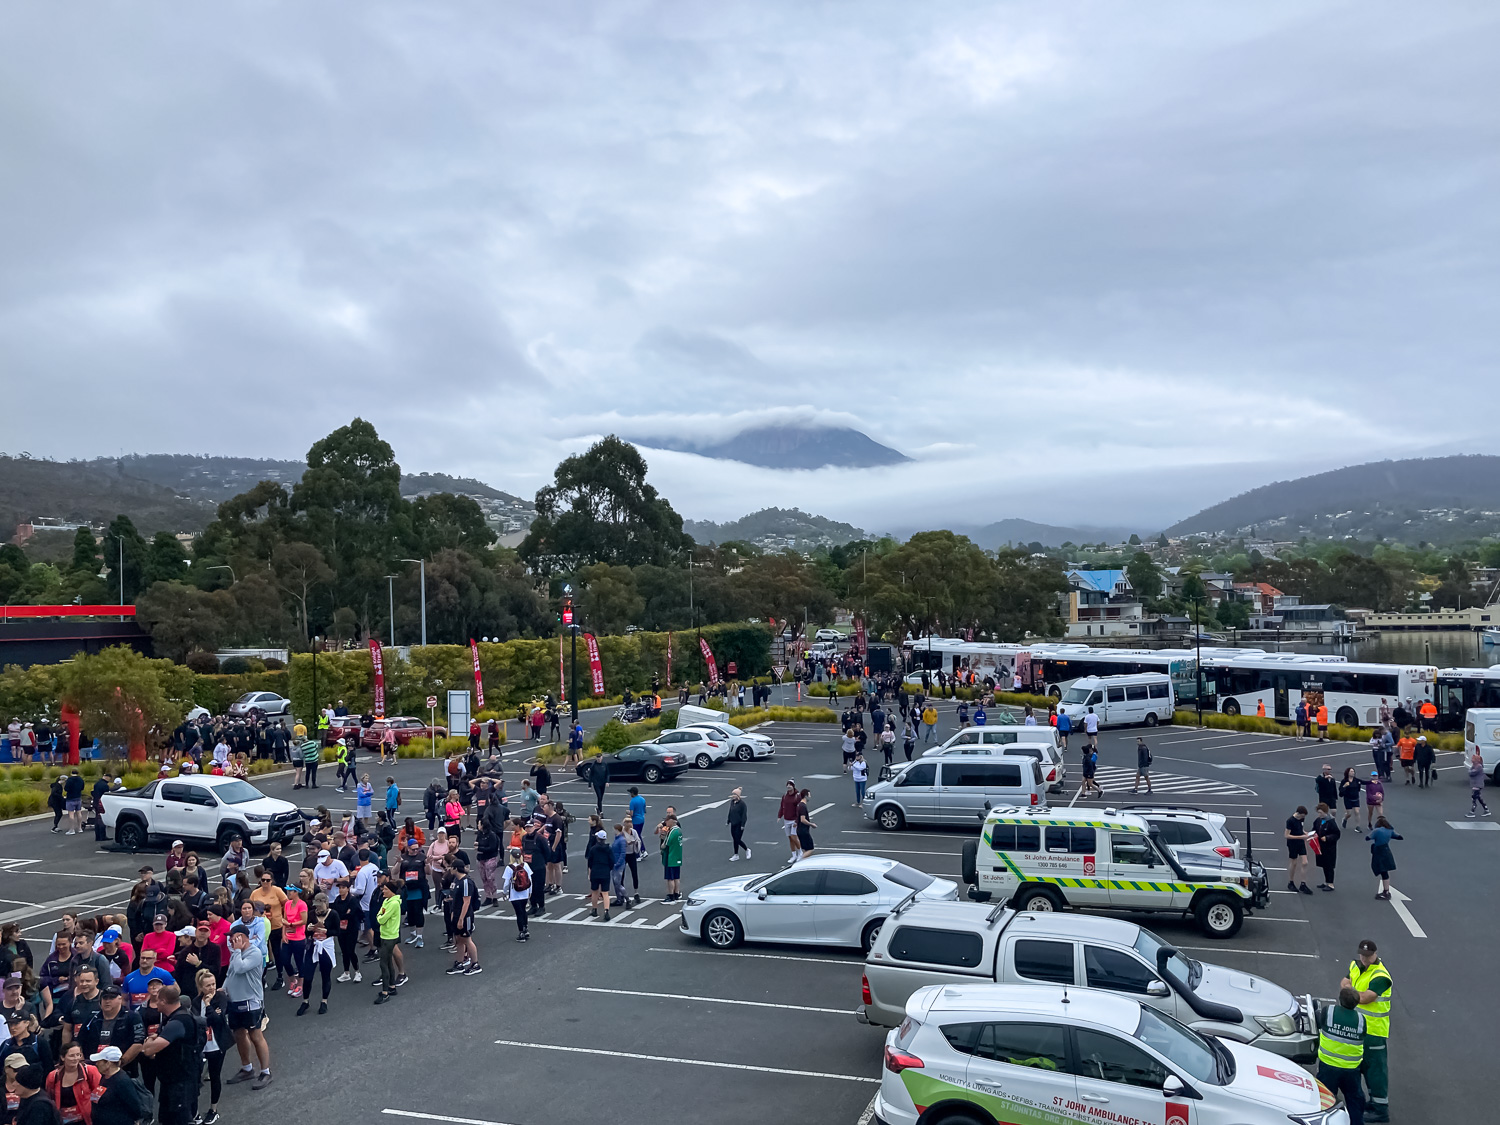 A car park filled with people, emergency vehicles and buses. In the background is a cloud covered mountain